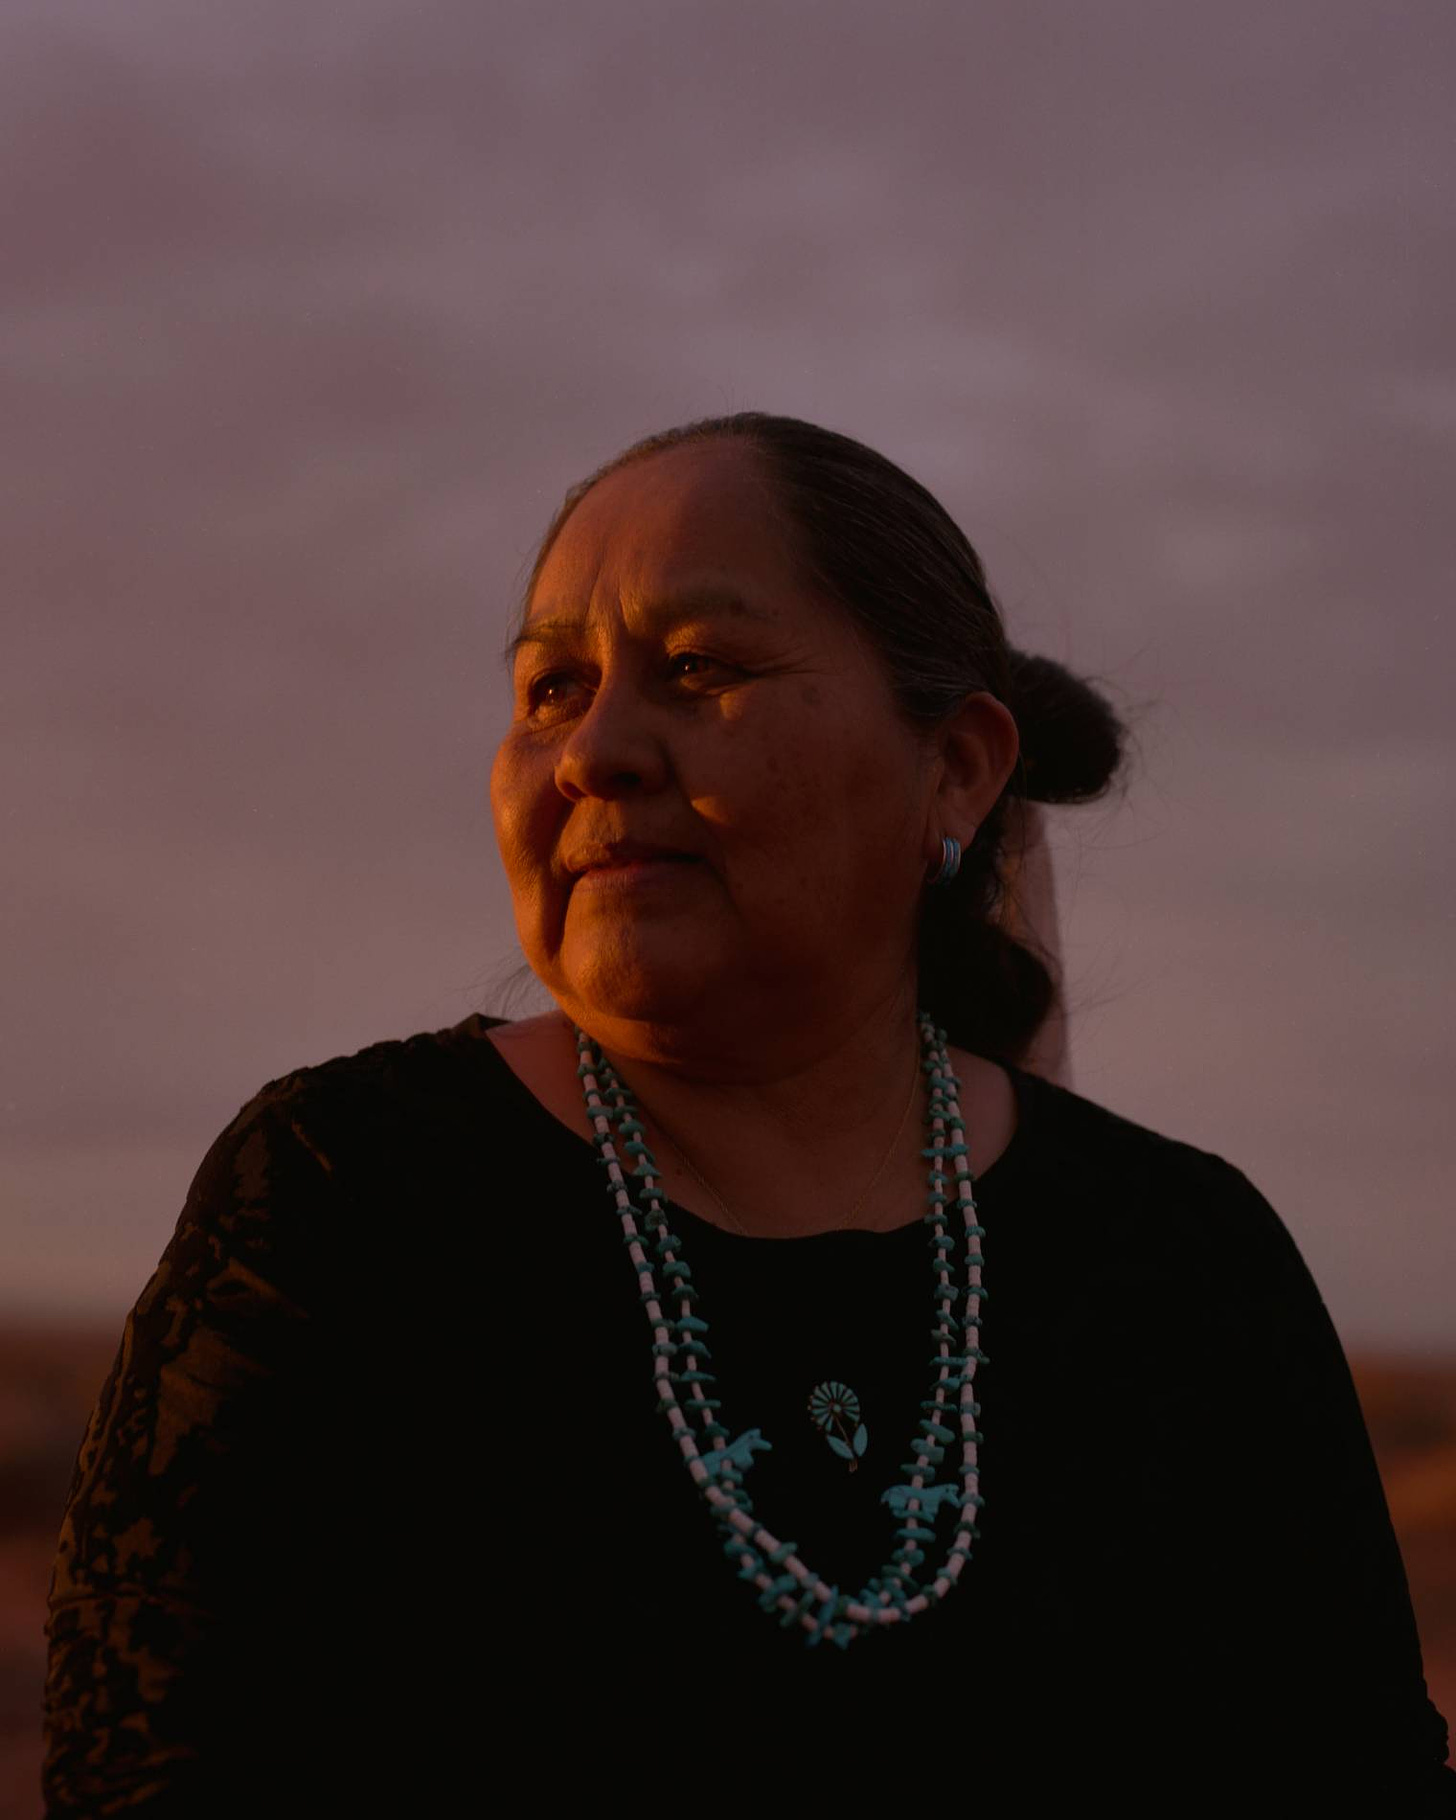 Elouise Wilson is pictured at her home in Monument Valley, on the Navajo reservation. Wilson is the mother of eight and lived with her family in a traditional hogan as recent as 2006. She is the mother of Cynthia Wilson, a Traditional Foods Program Director for the Utah Dine Bikeyah who is also helping to protect Bears Ears and its cultural traditions.